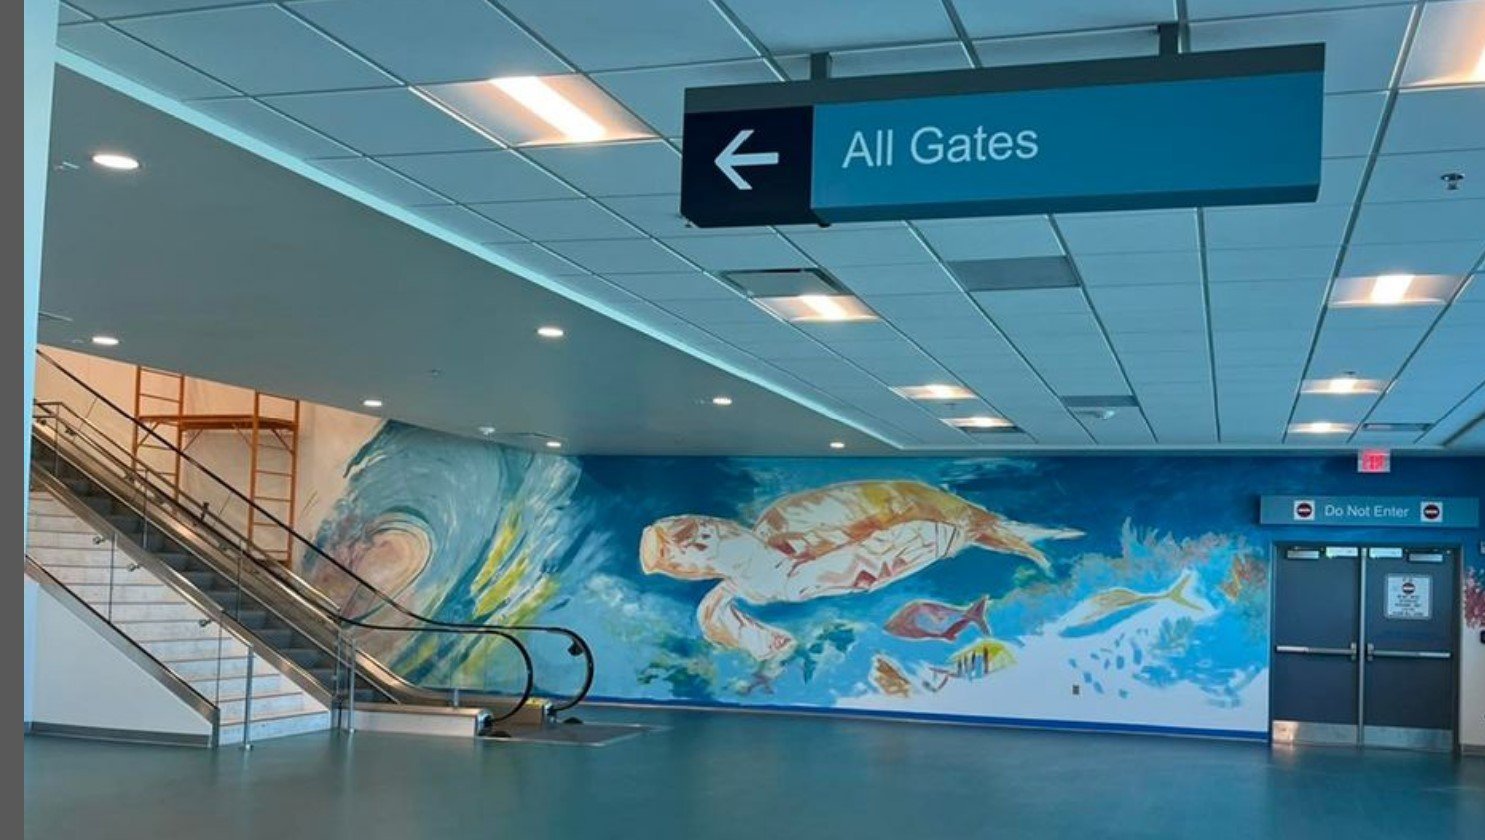 A new area that's part of a Melbourne International Renovation. It's an underwater watercolor mural prominently featuring a sea turtle. There's an escalator for airline passengers to the left and a sign that says all gates who are leaving from MLB